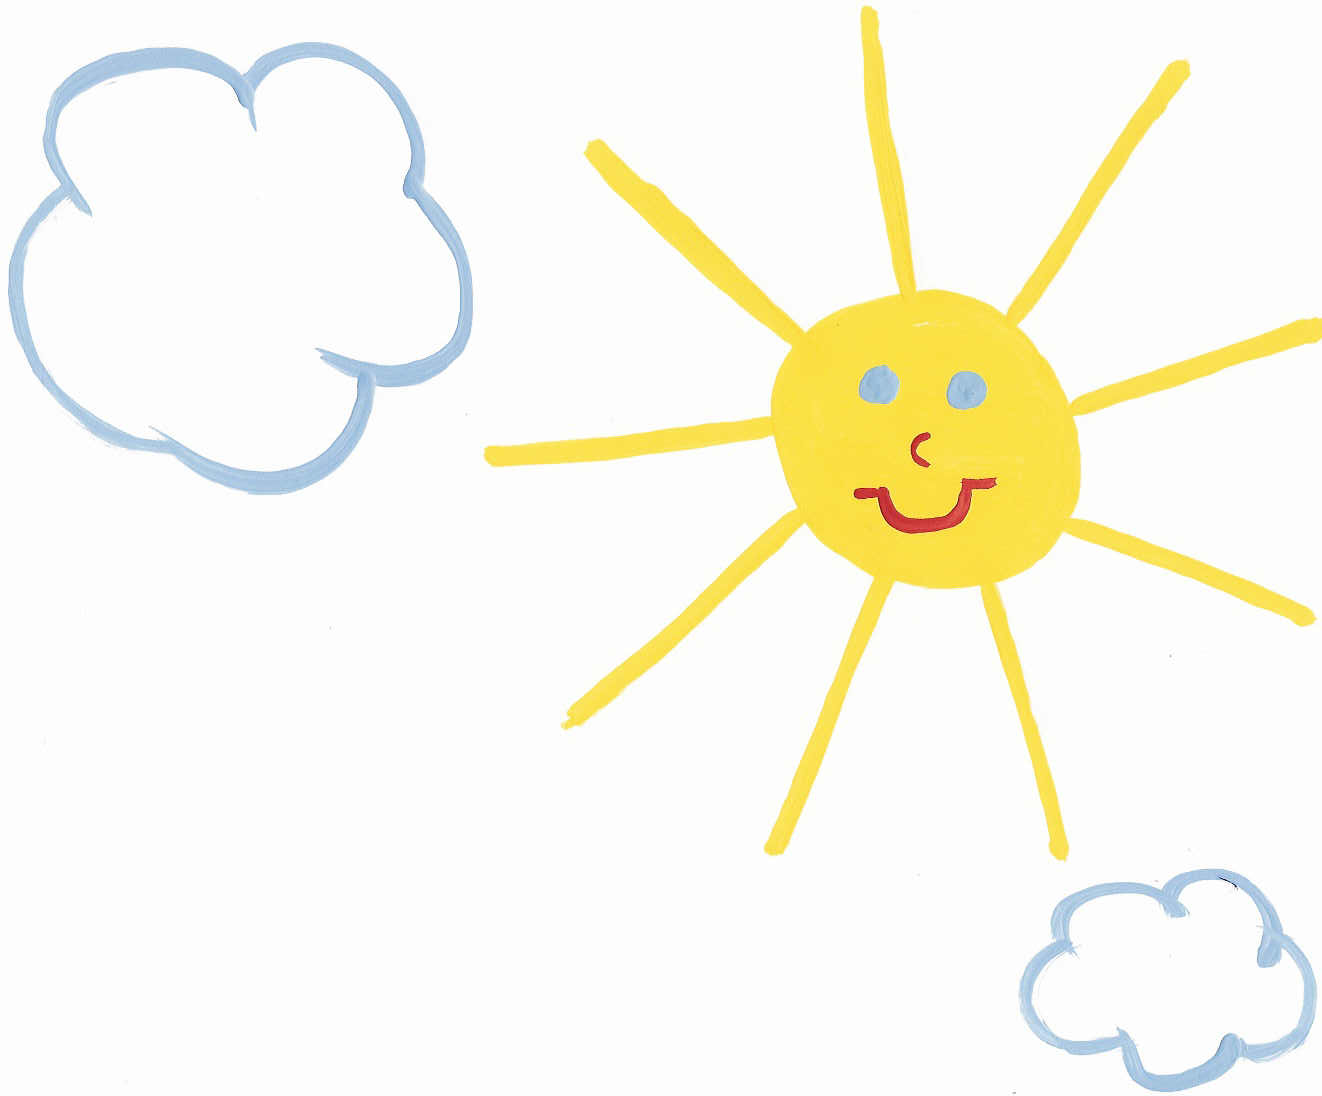 Sunny clipart today. Free day pictures download